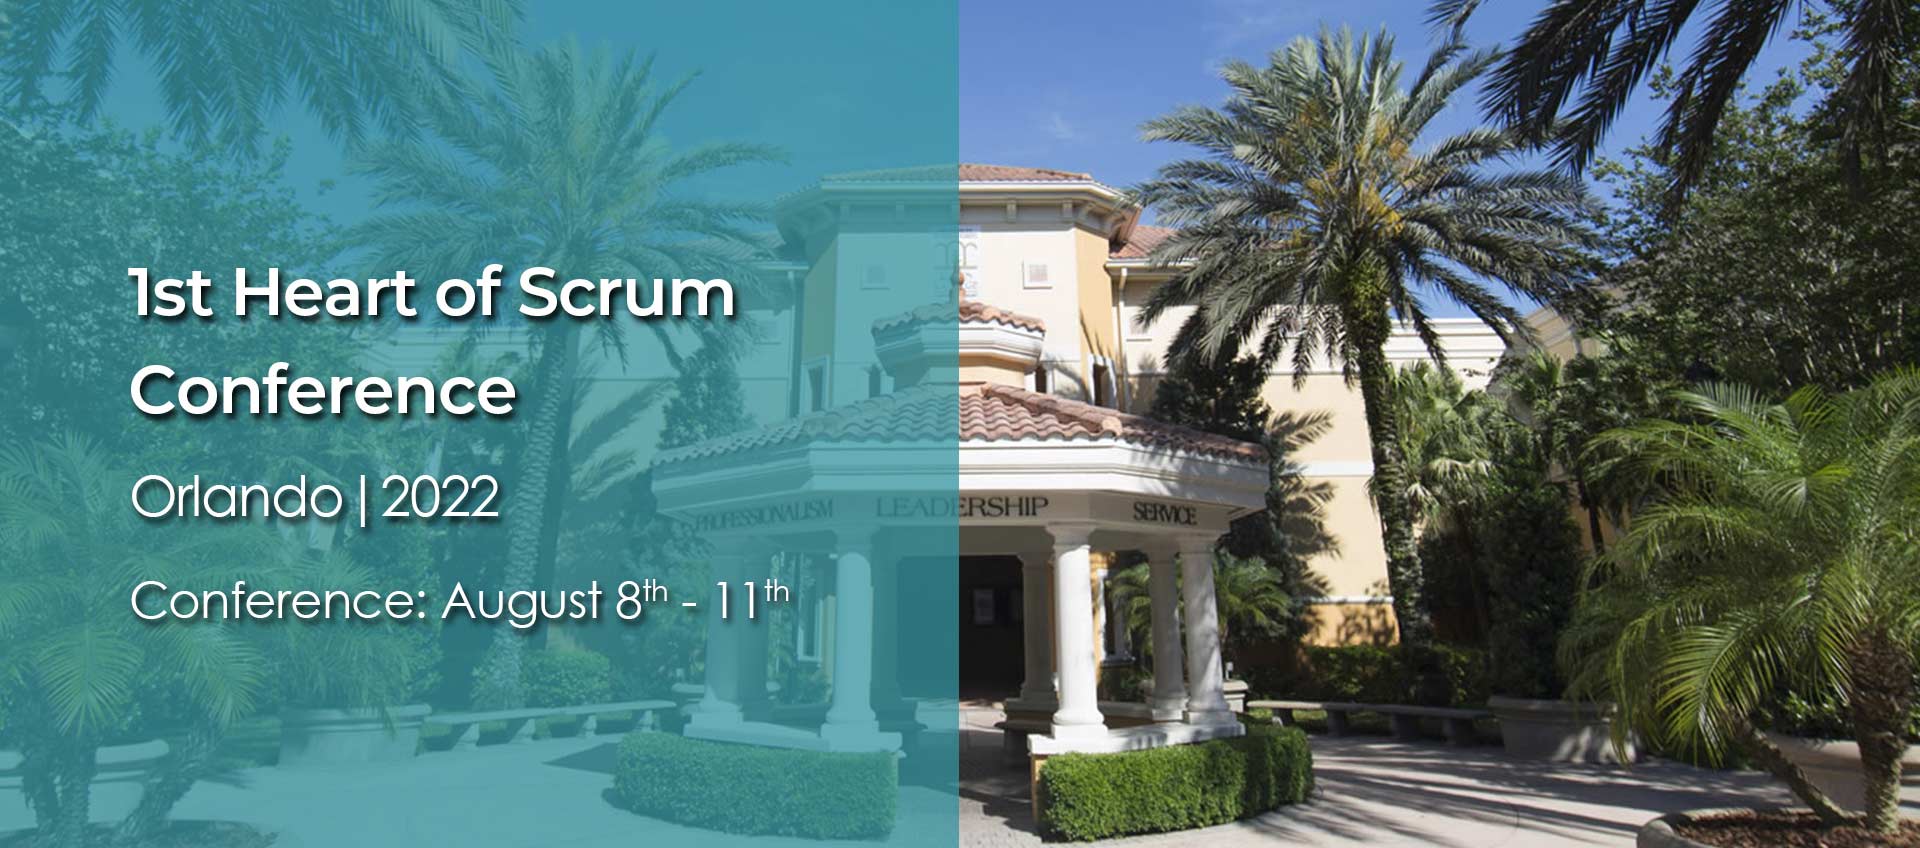 1st Heart of Scrum Conference, Orlando 2022, Conference: August 8th - 11th